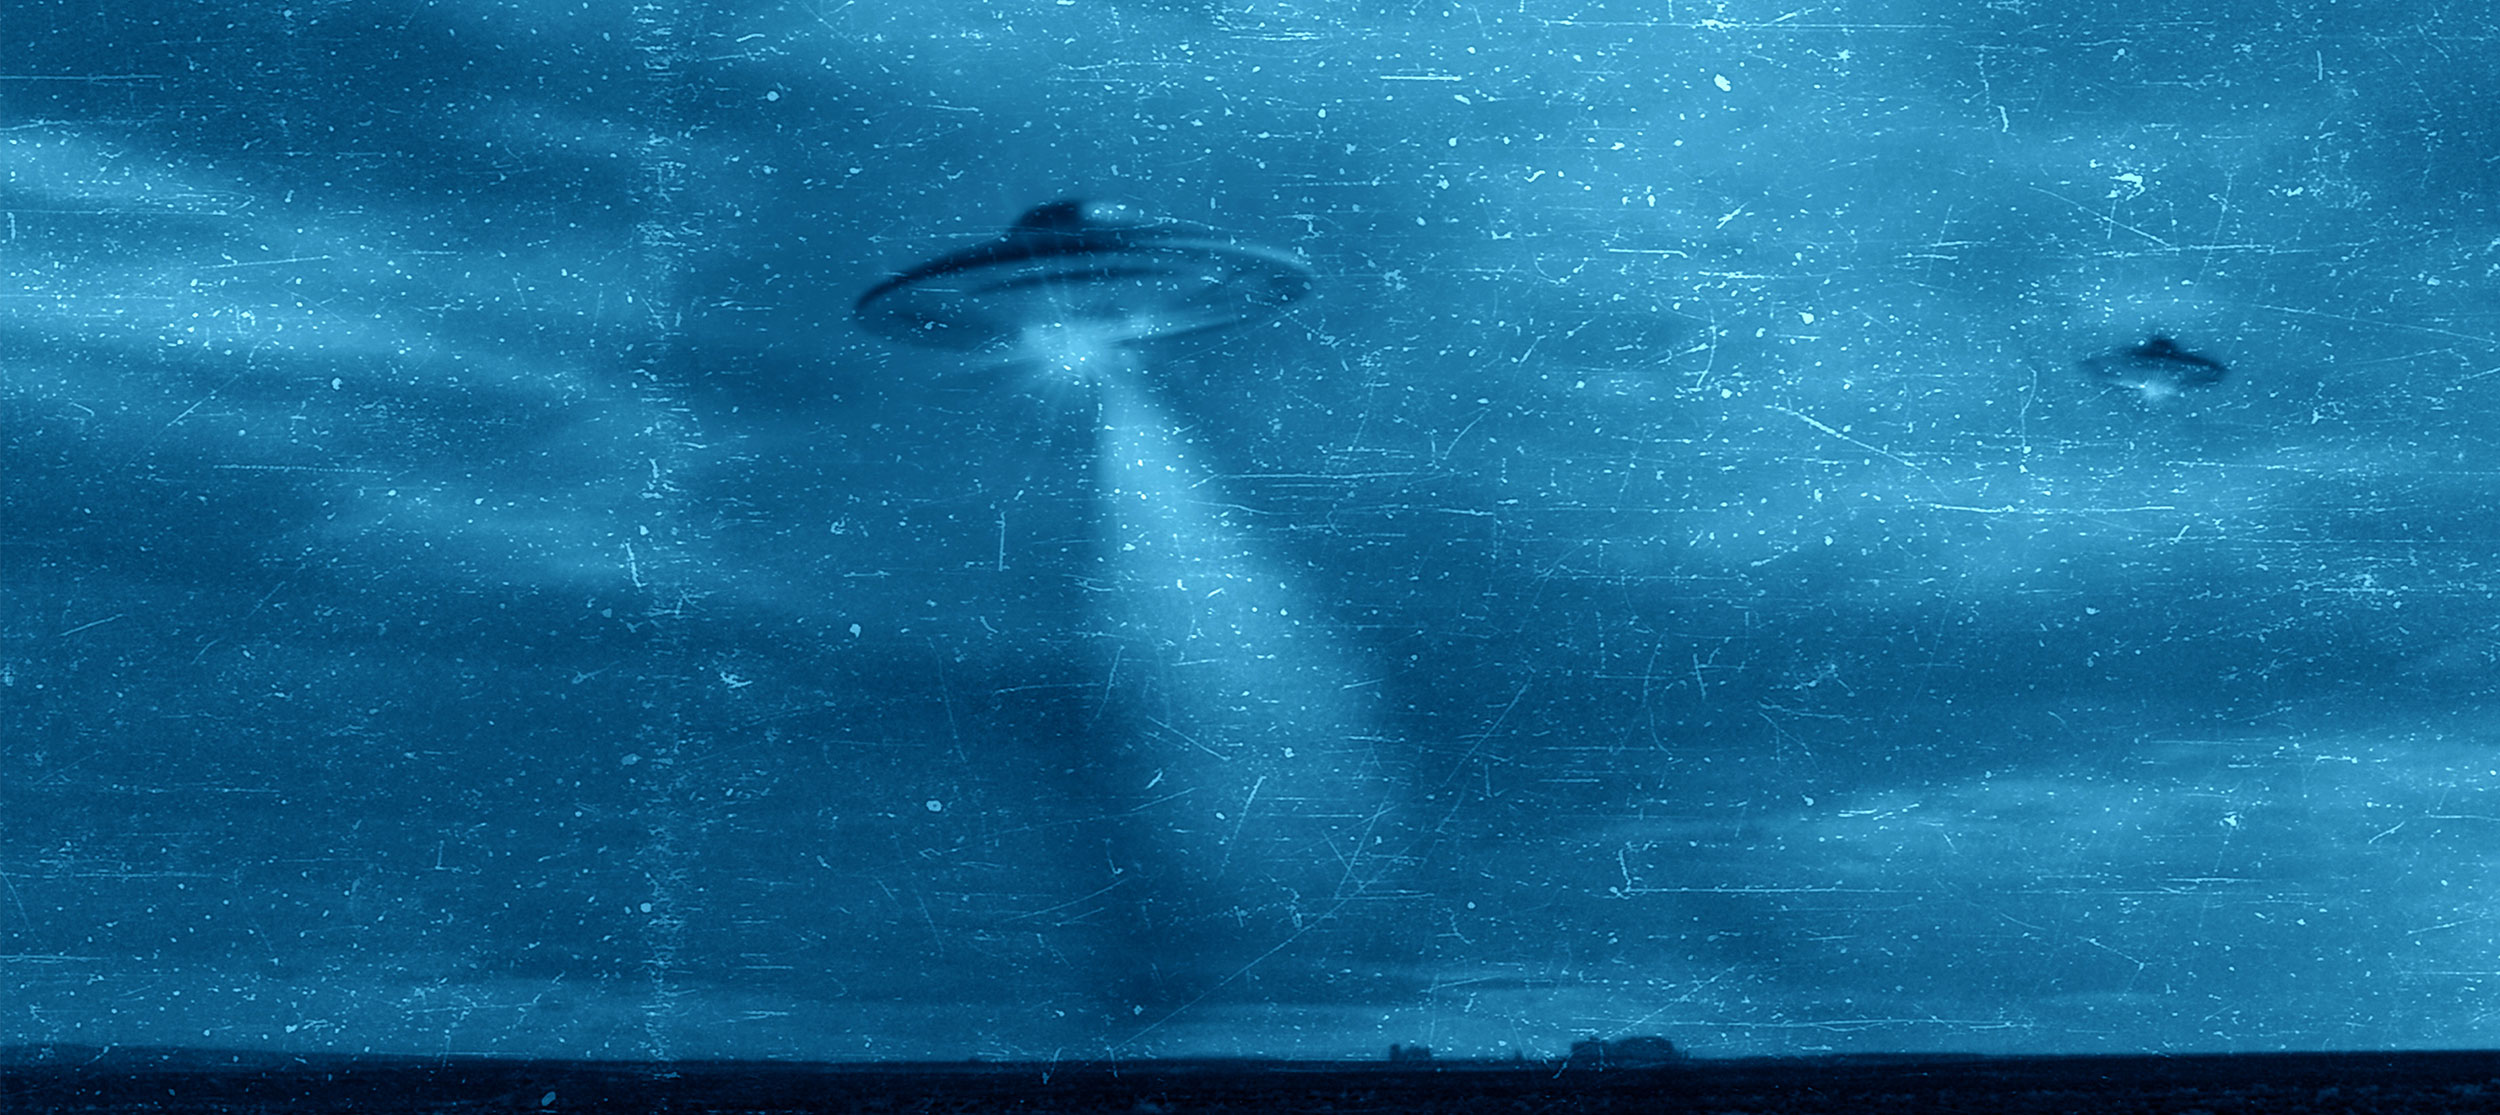 Which government organization conducted the secretive Project Blue Book?